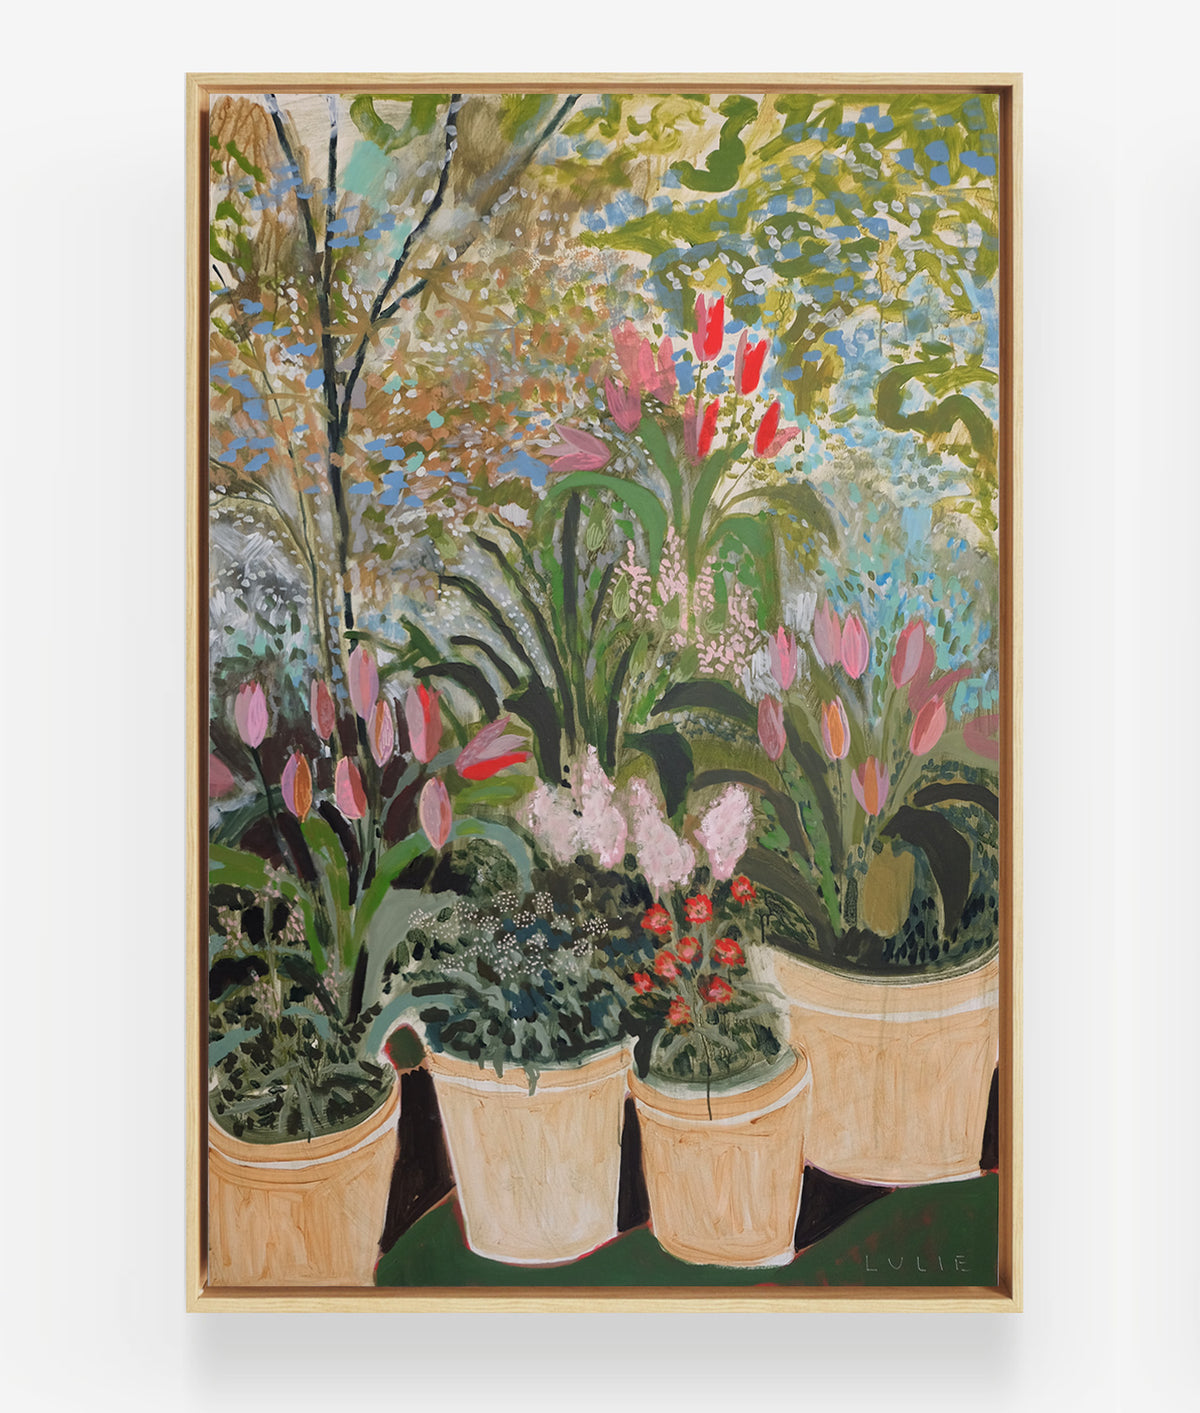 Potted Plant No. 7 - 40 x 60"